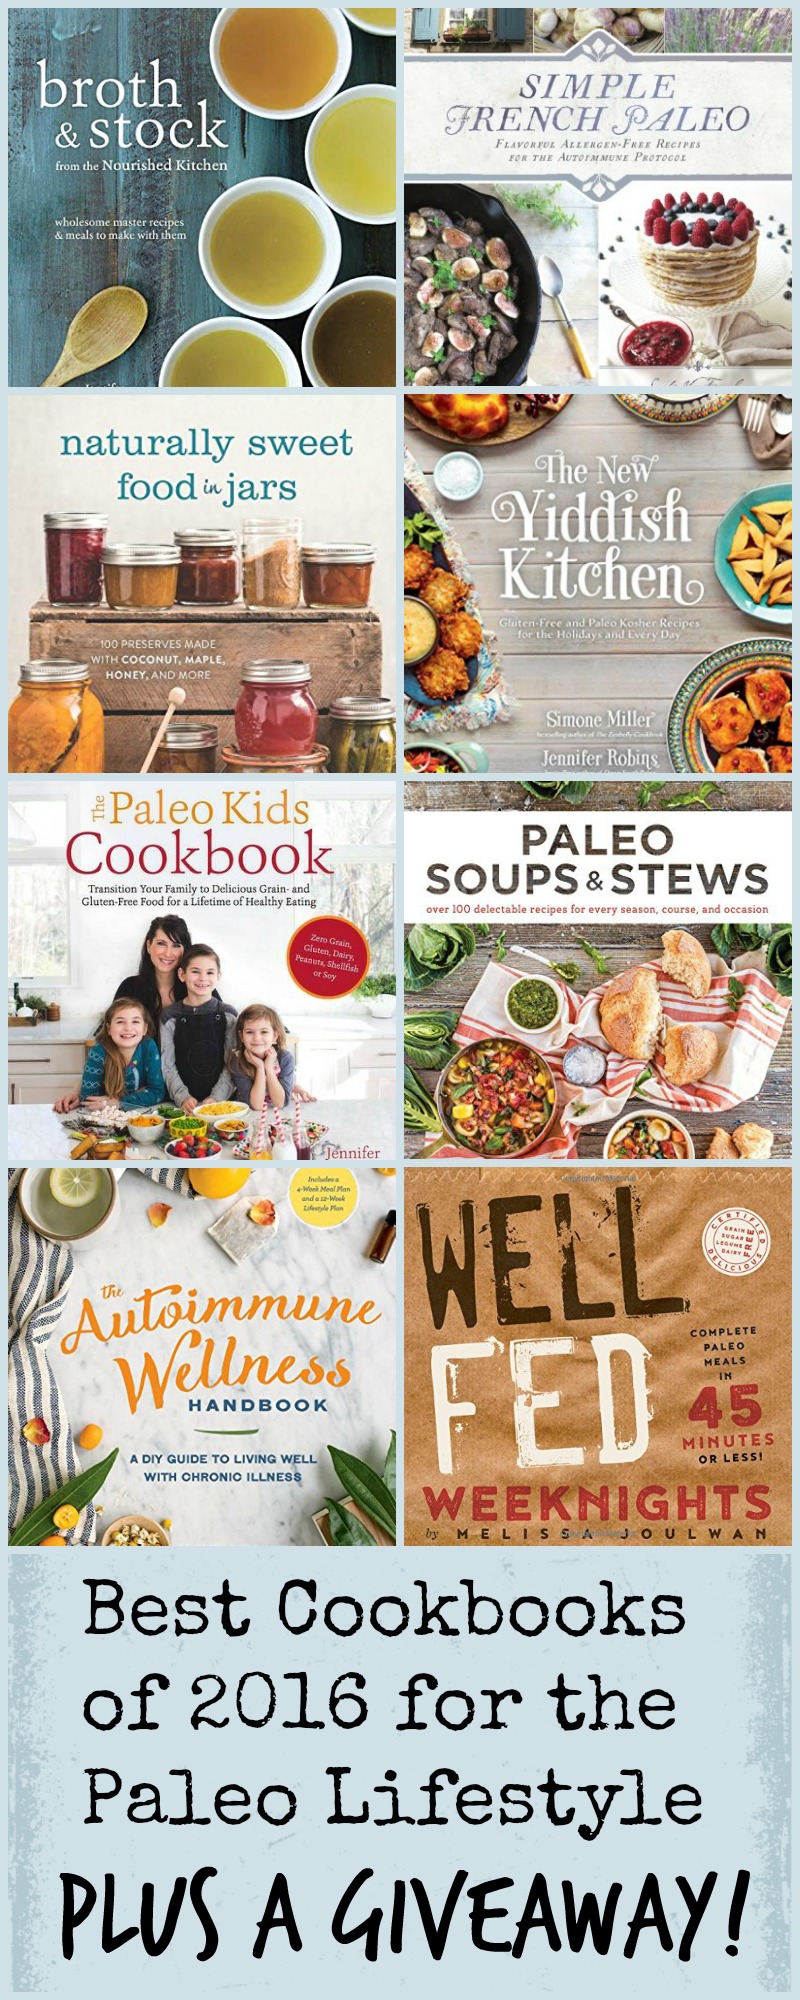 My Favorite Cookbooks for the Paleo Lifestyle 2016